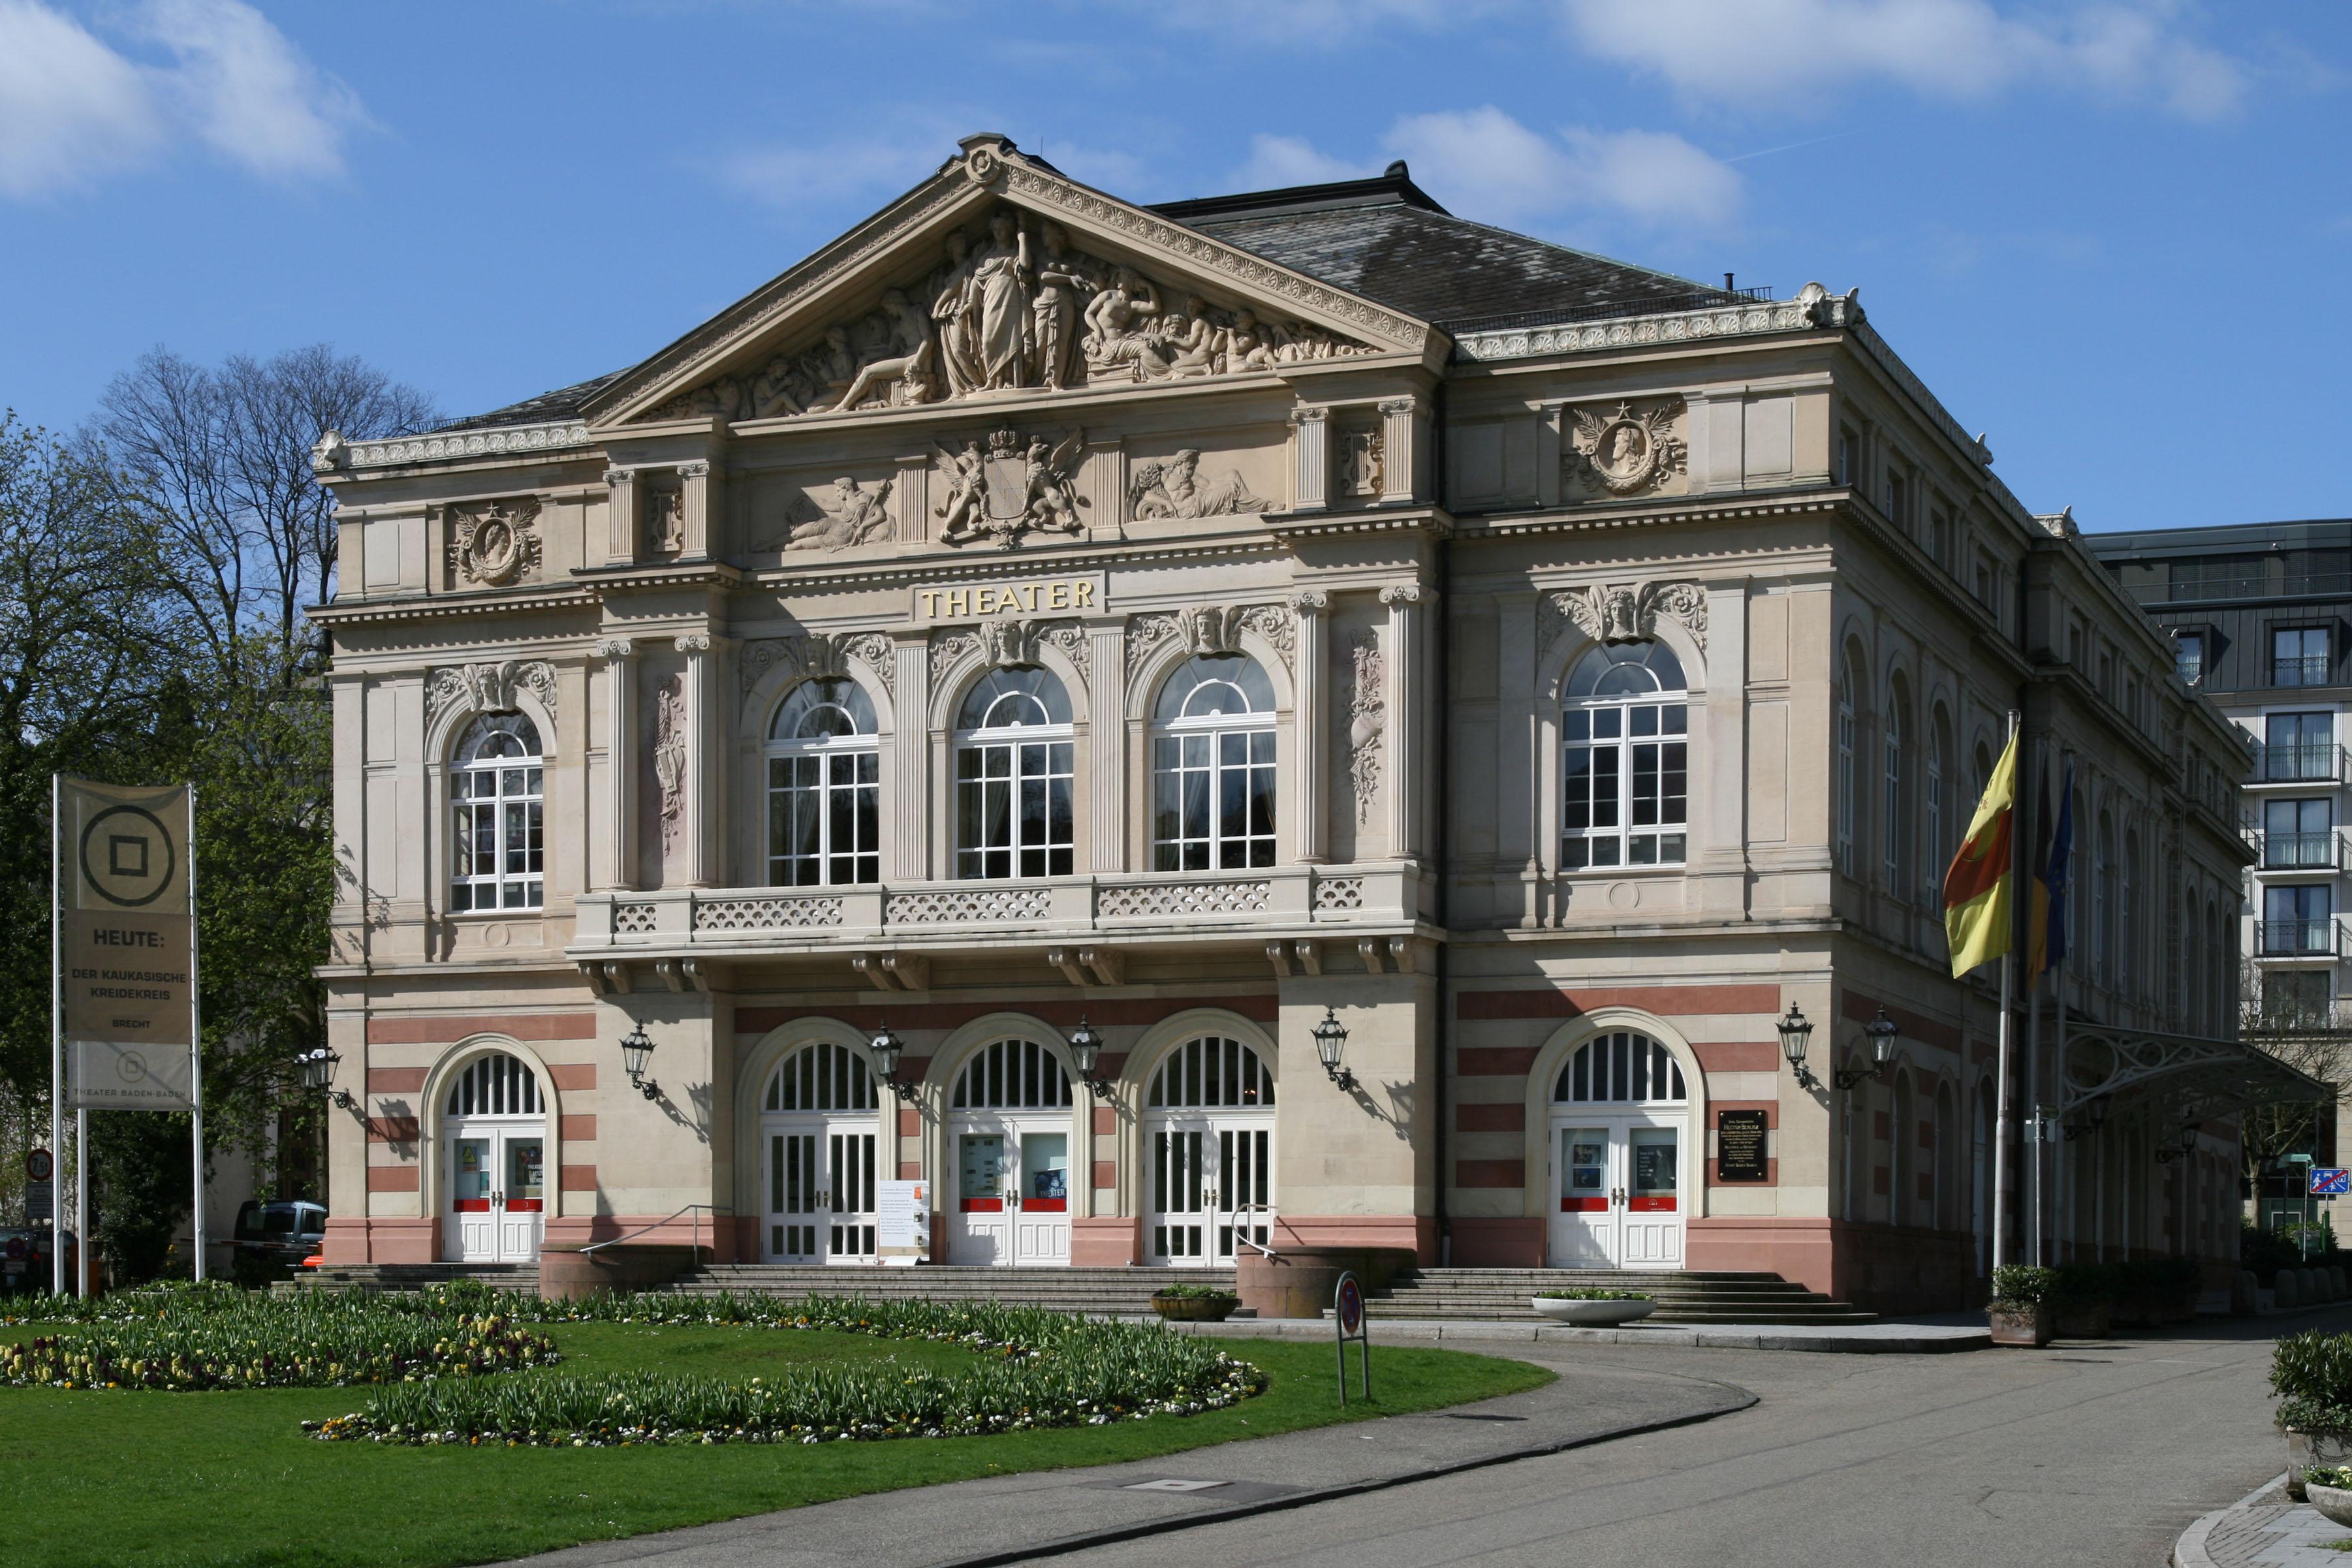 The Theater in Baden-Baden, Germany.